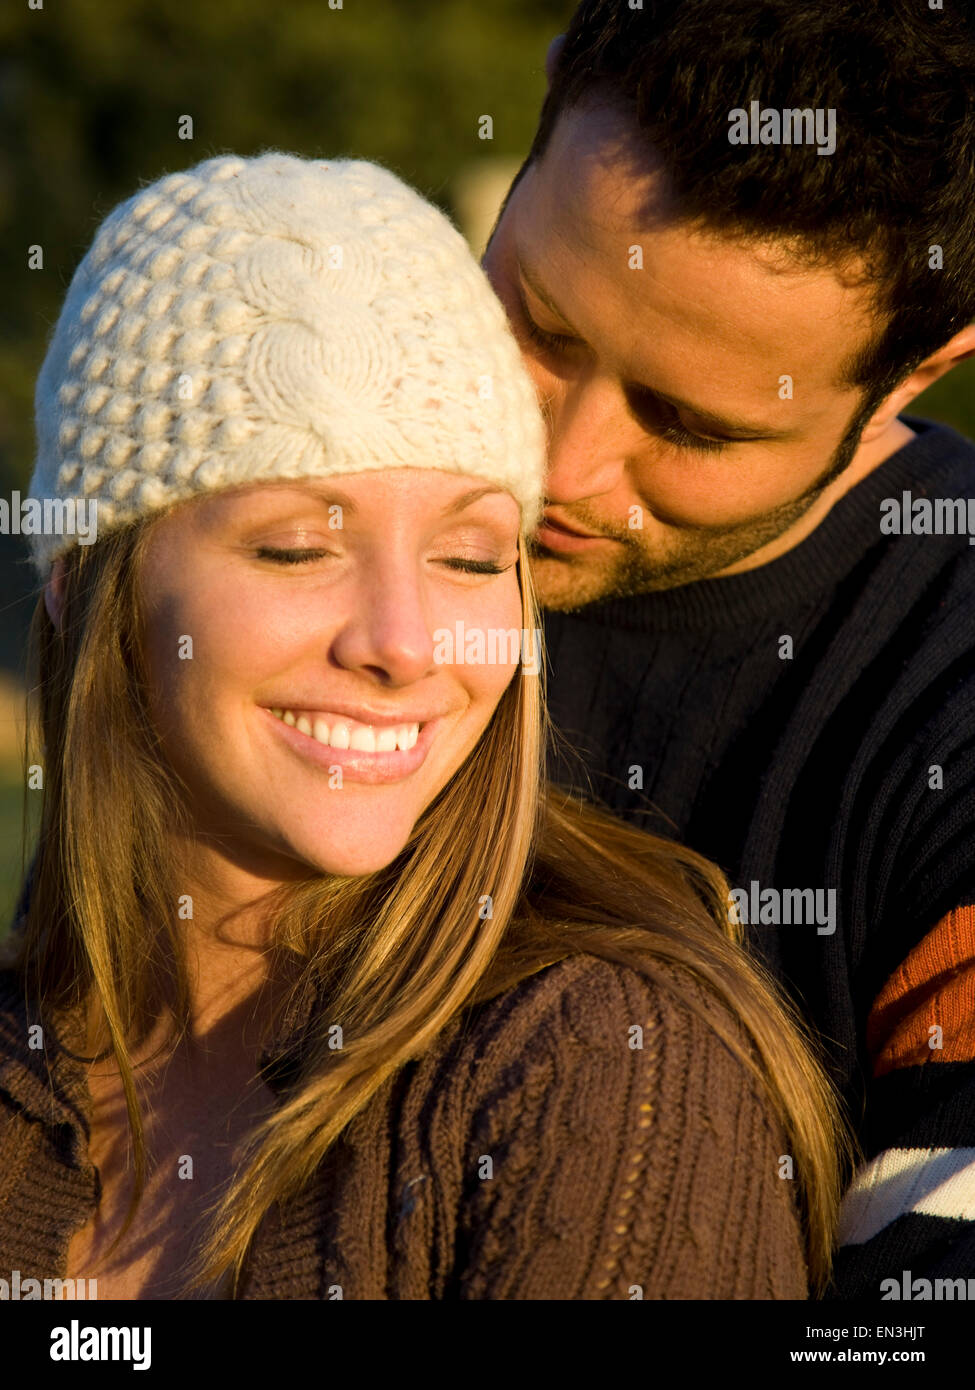 USA, Utah, Provo, Young couple embracing Banque D'Images